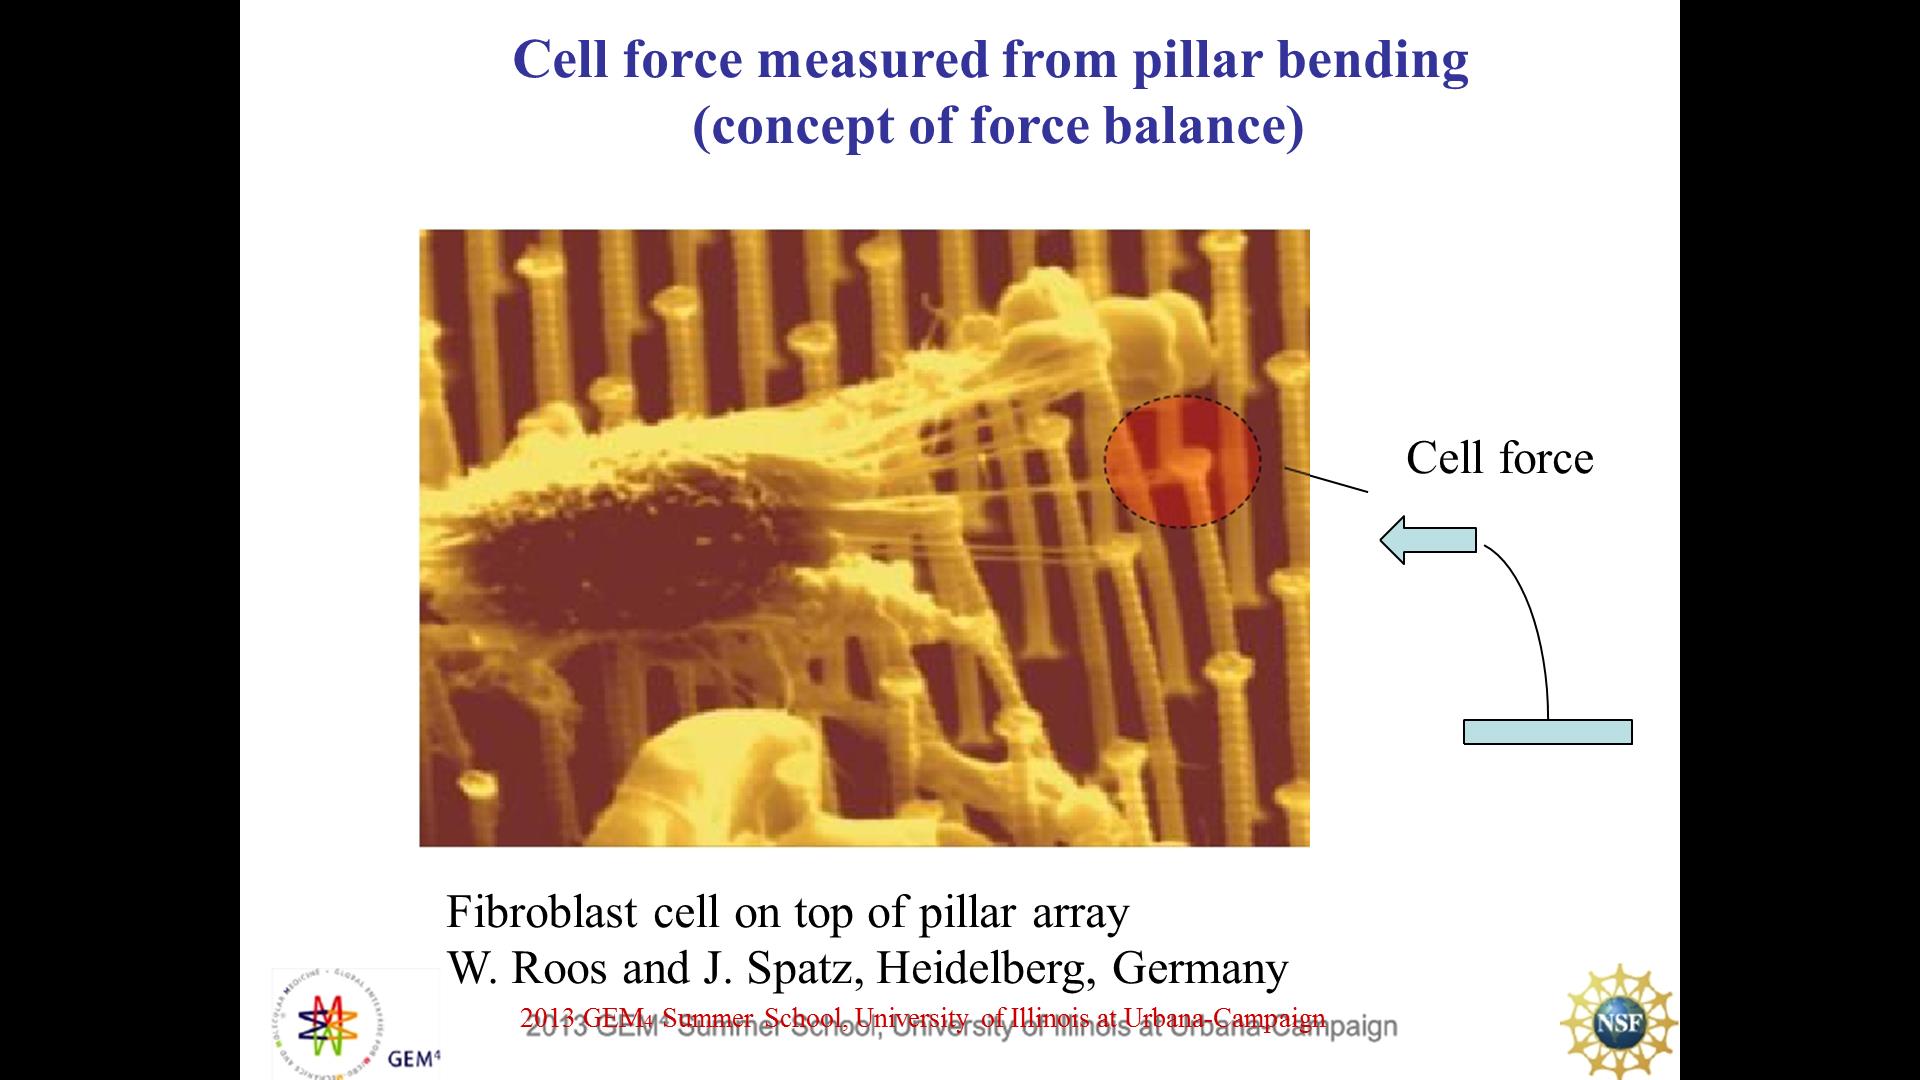 Cell force measured from pillar bending (concept of force balance)